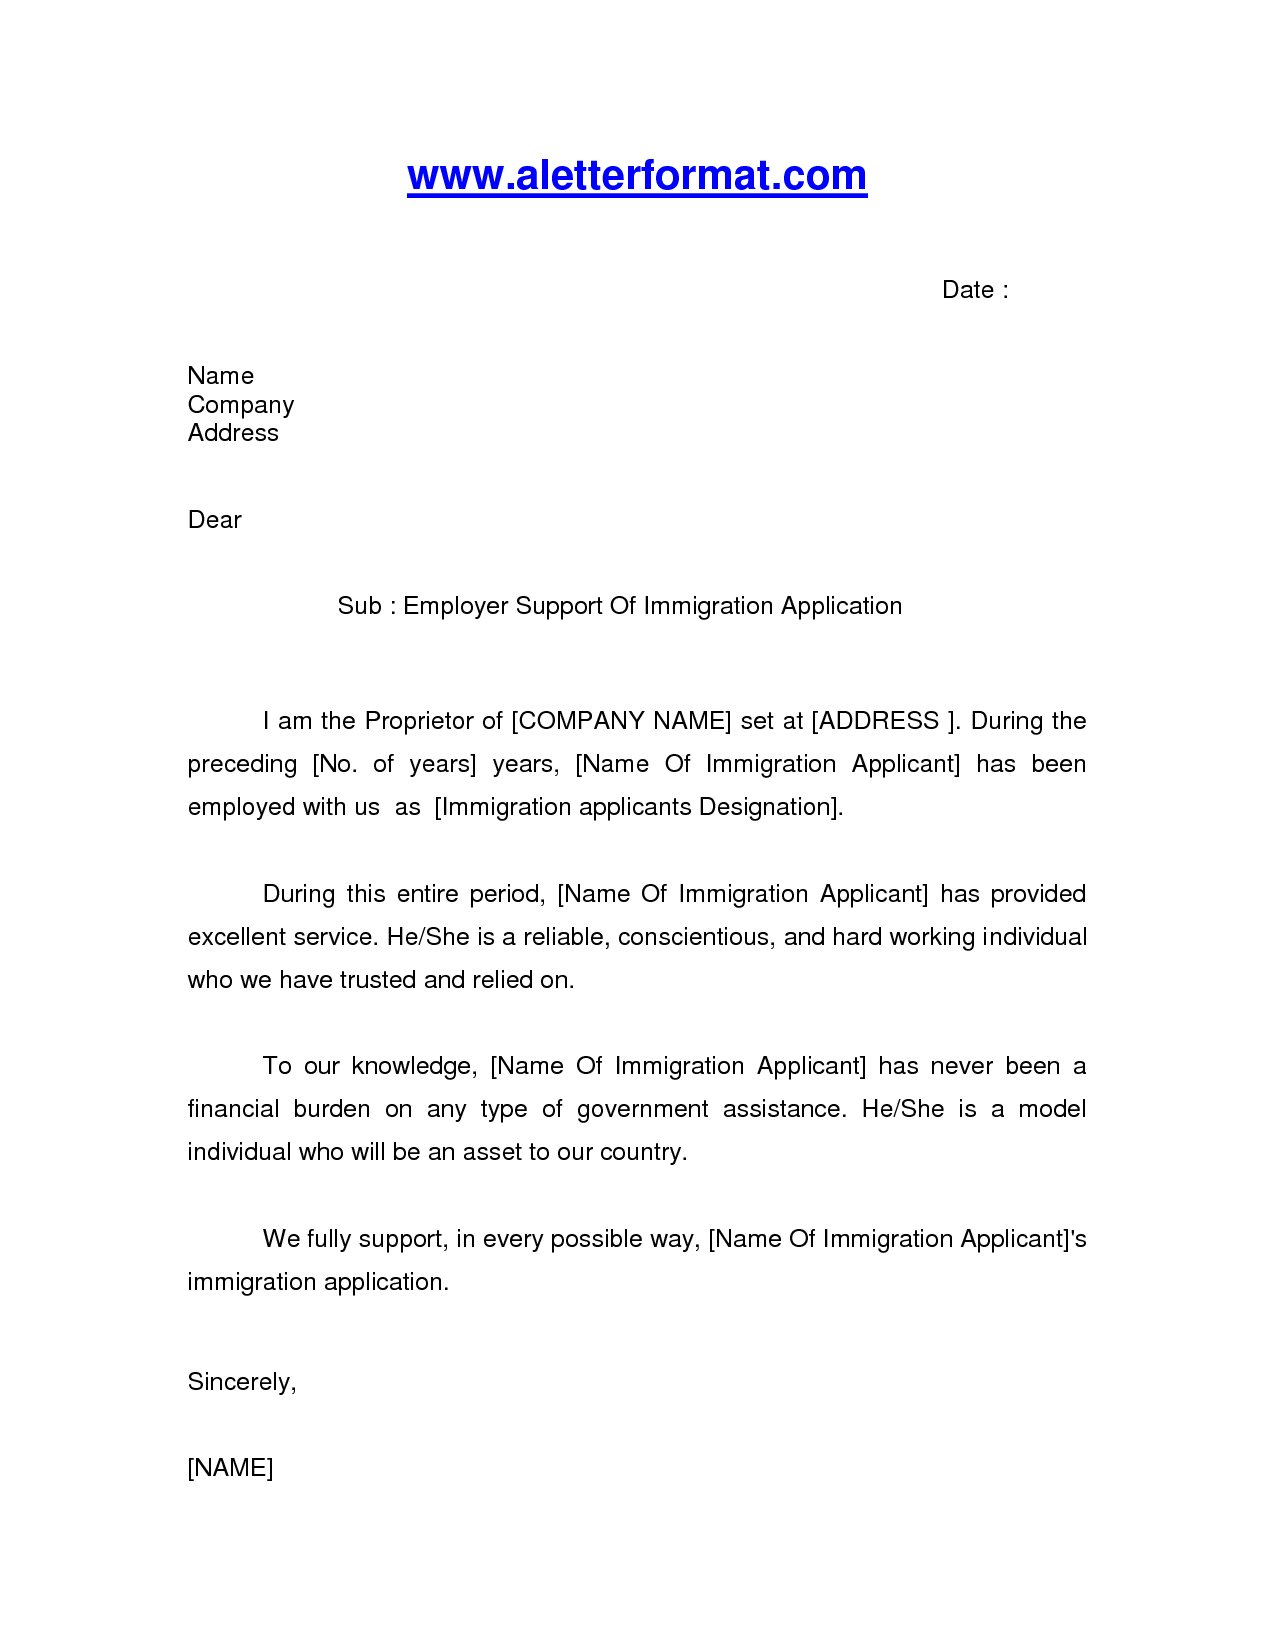 Reference Letter Template For Immigration Debandje inside sizing 1275 X 1650